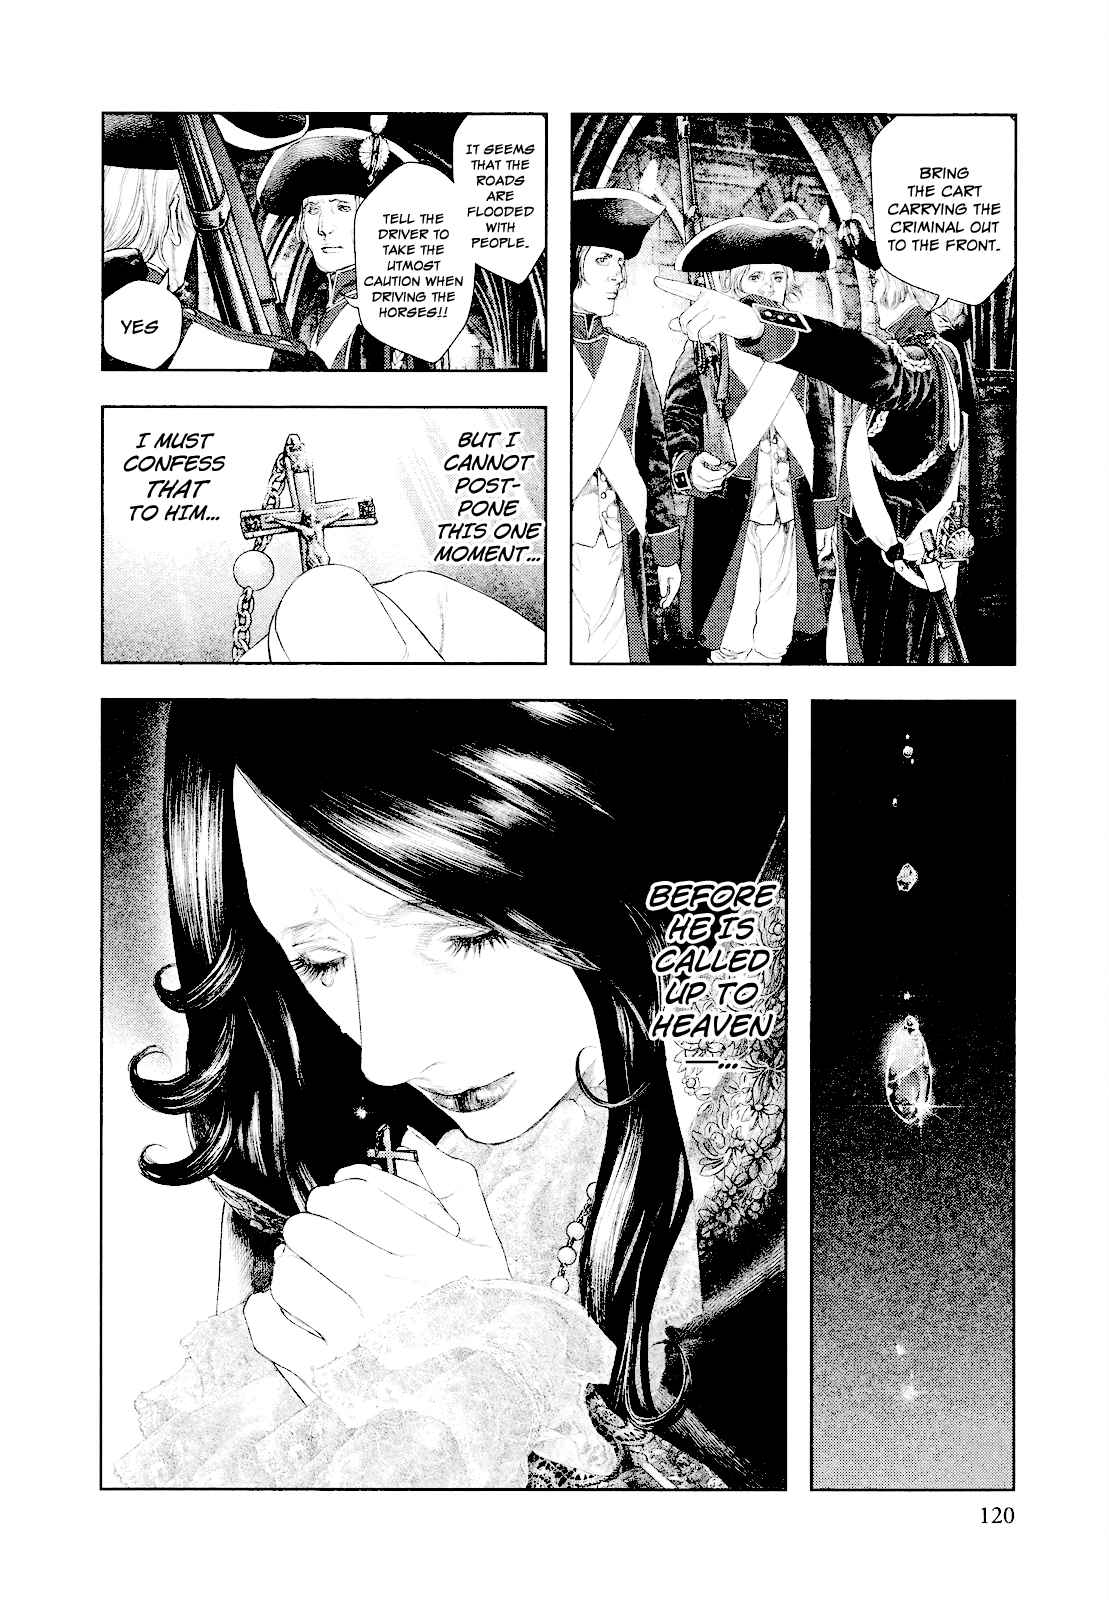 Innocent Vol. 3 Ch. 27 Dignity and Tragedy